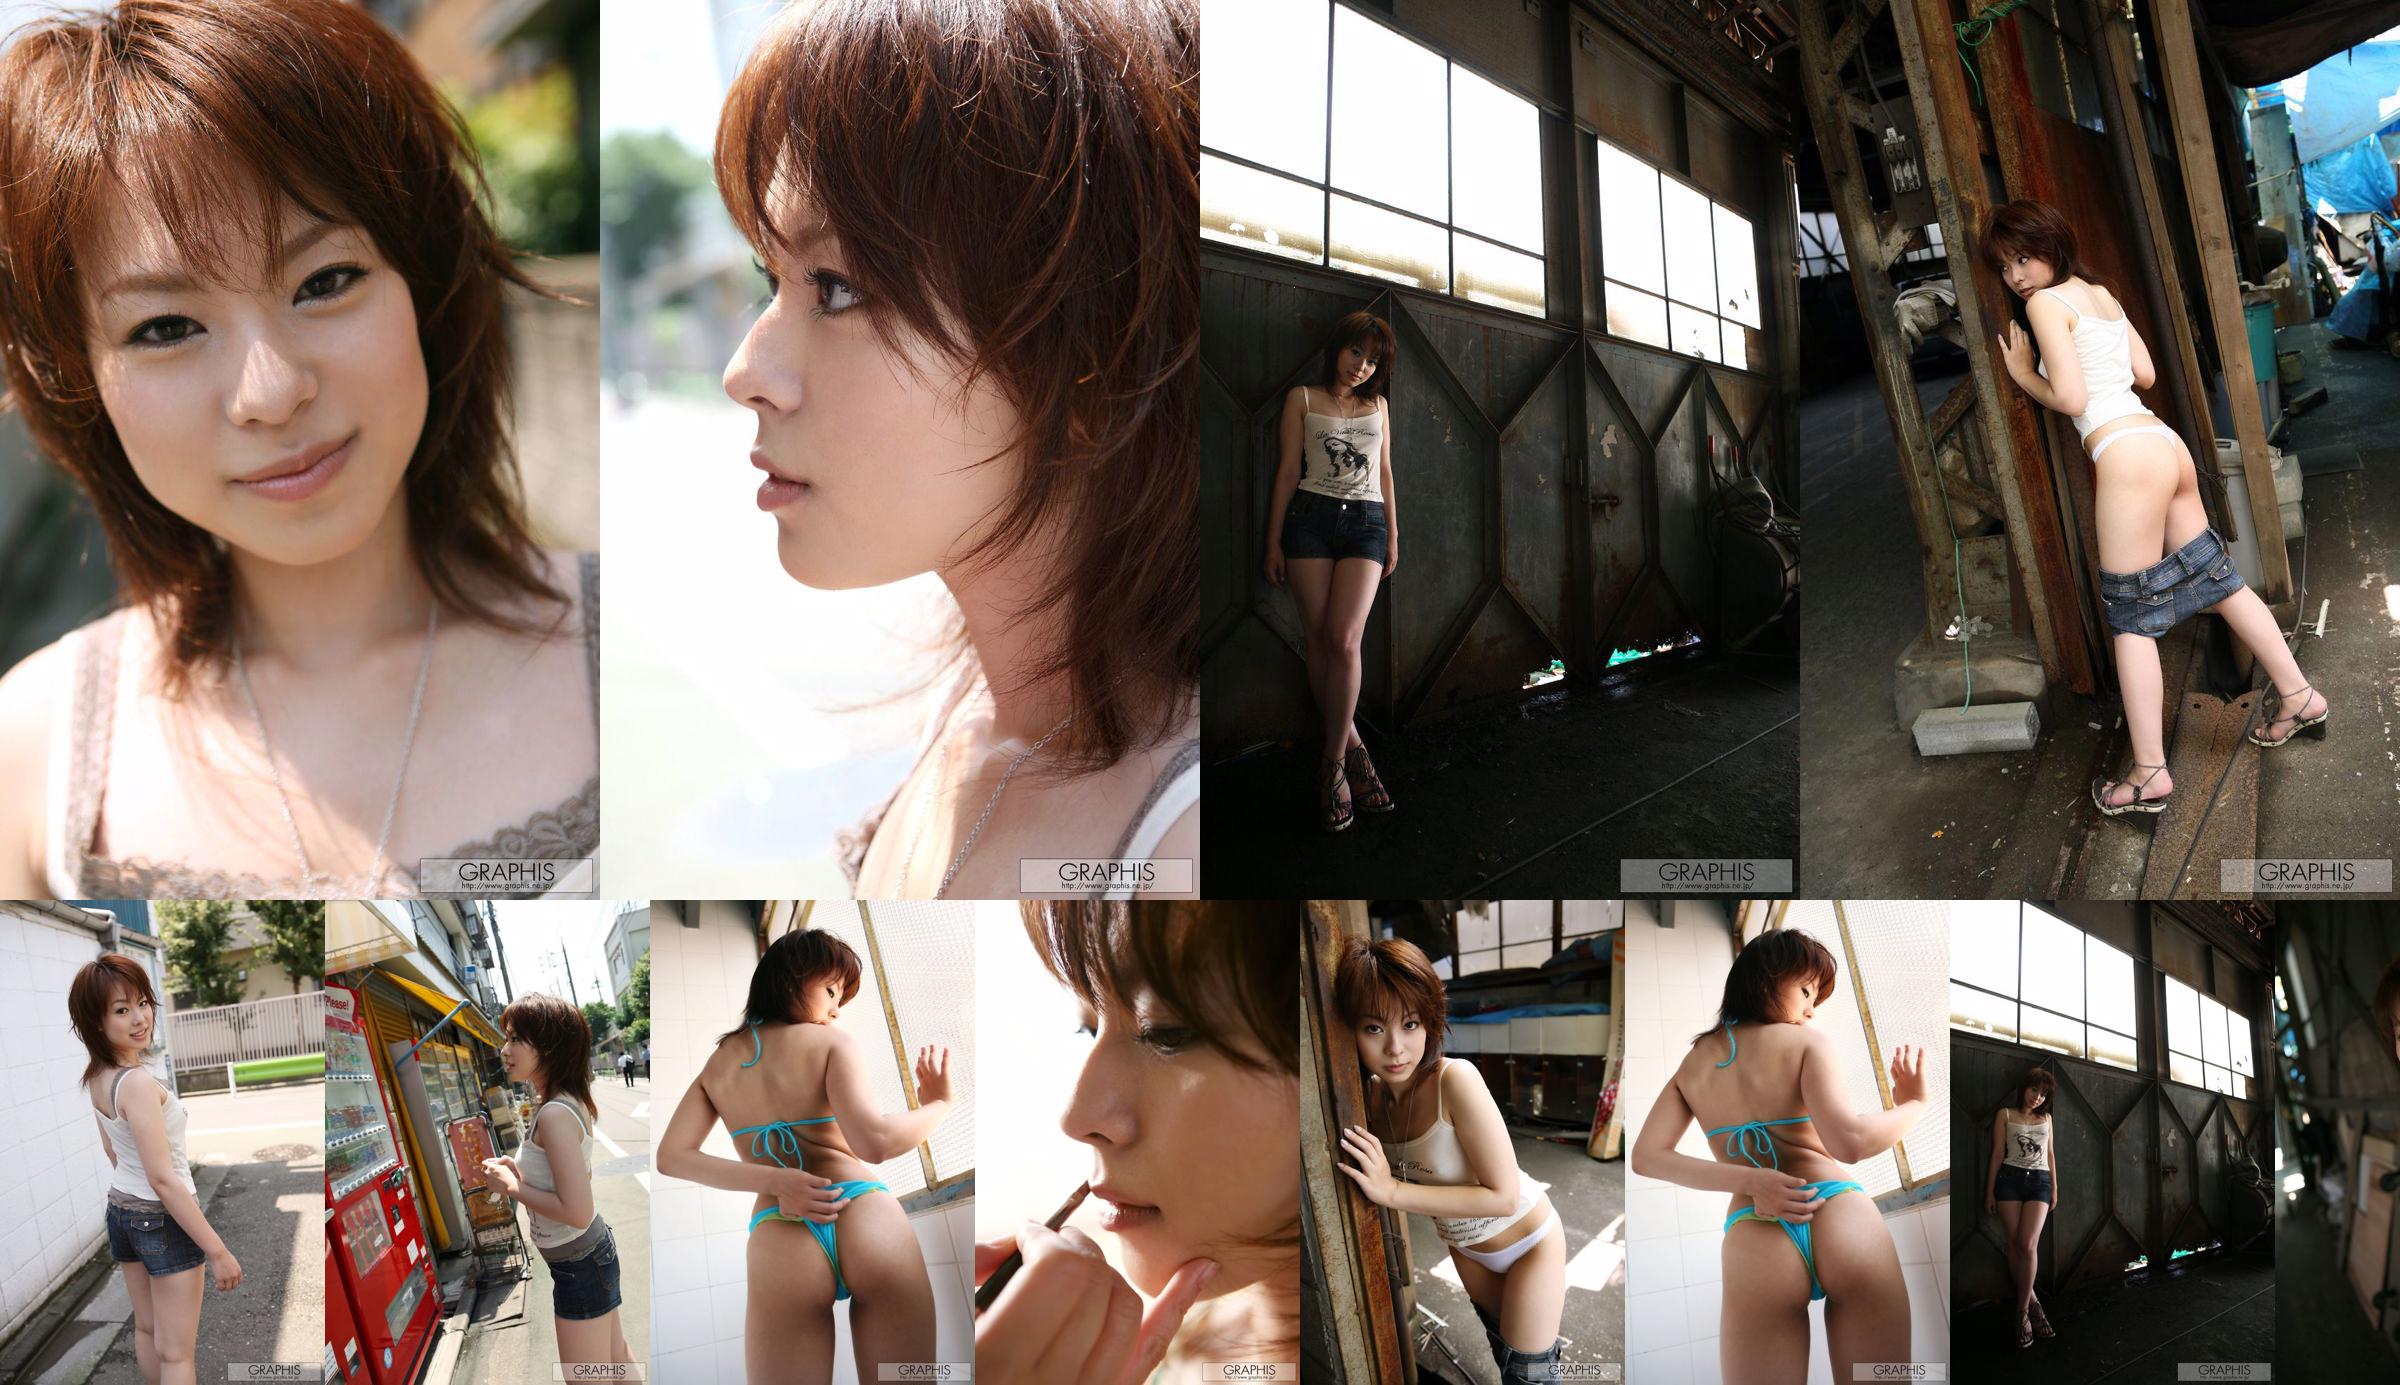 Mina Manabe Mina Manabe [Graphis] First Gravure First Take Off Daughter No.efa33a Pagina 2